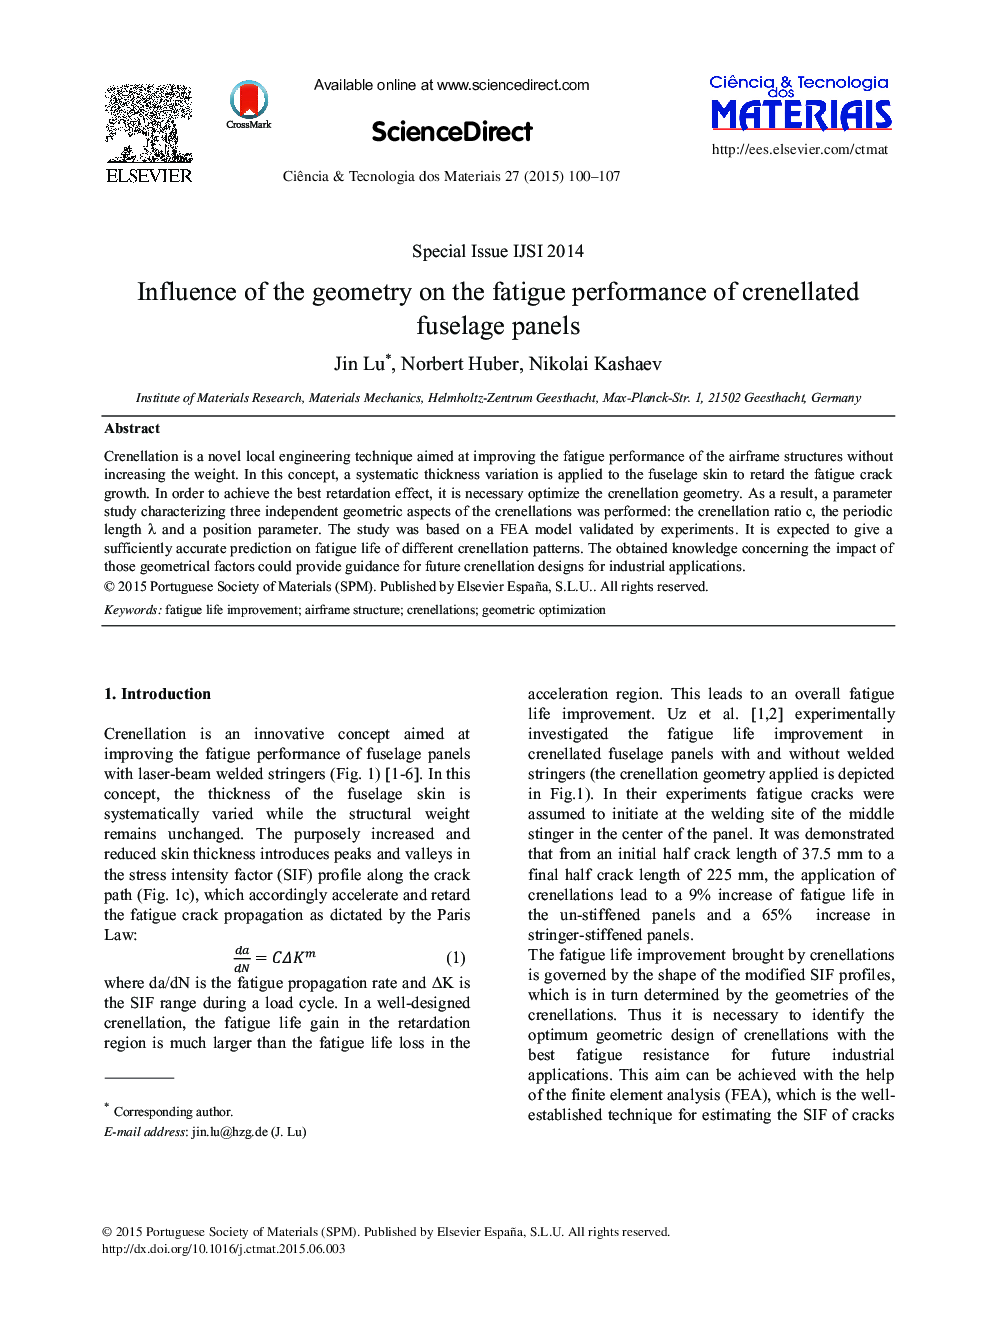 Influence of the geometry on the fatigue performance of crenellated fuselage panels